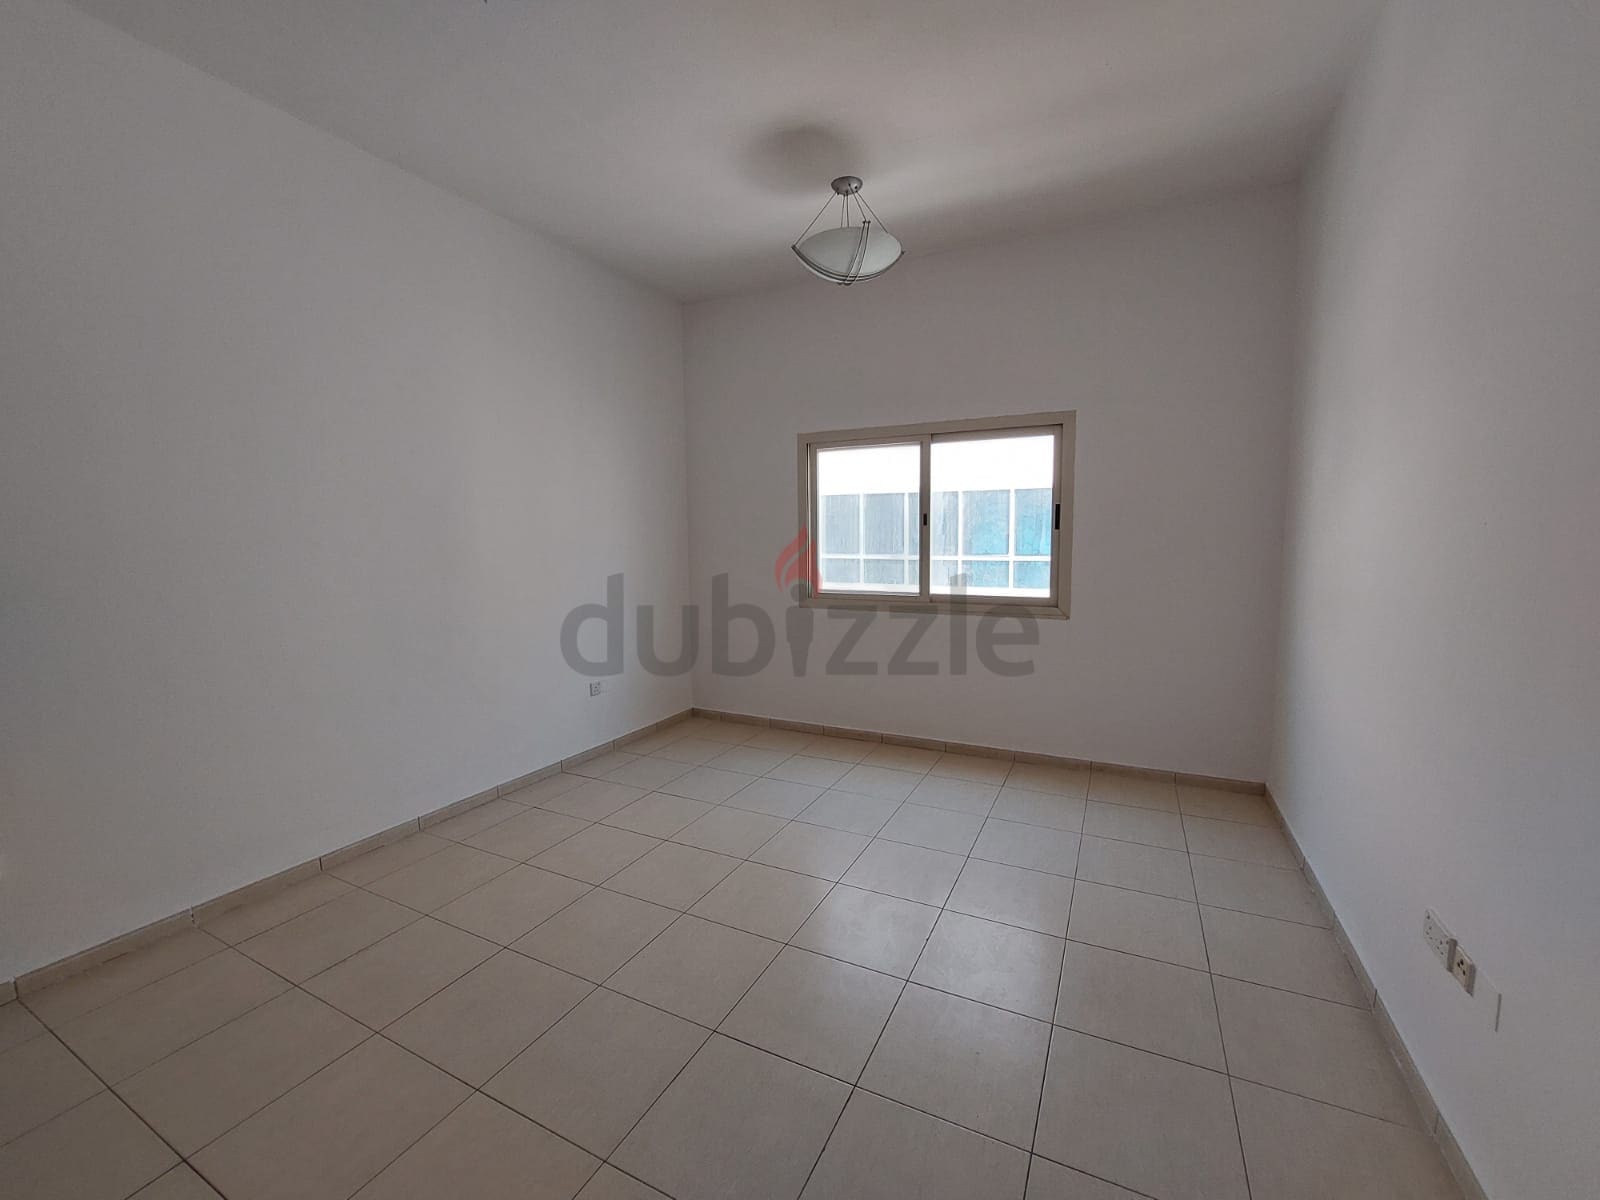 Amazing Two Bedrooms Apartment For Family Opposite Ghazal Mall In Al Wasl Road Dubai